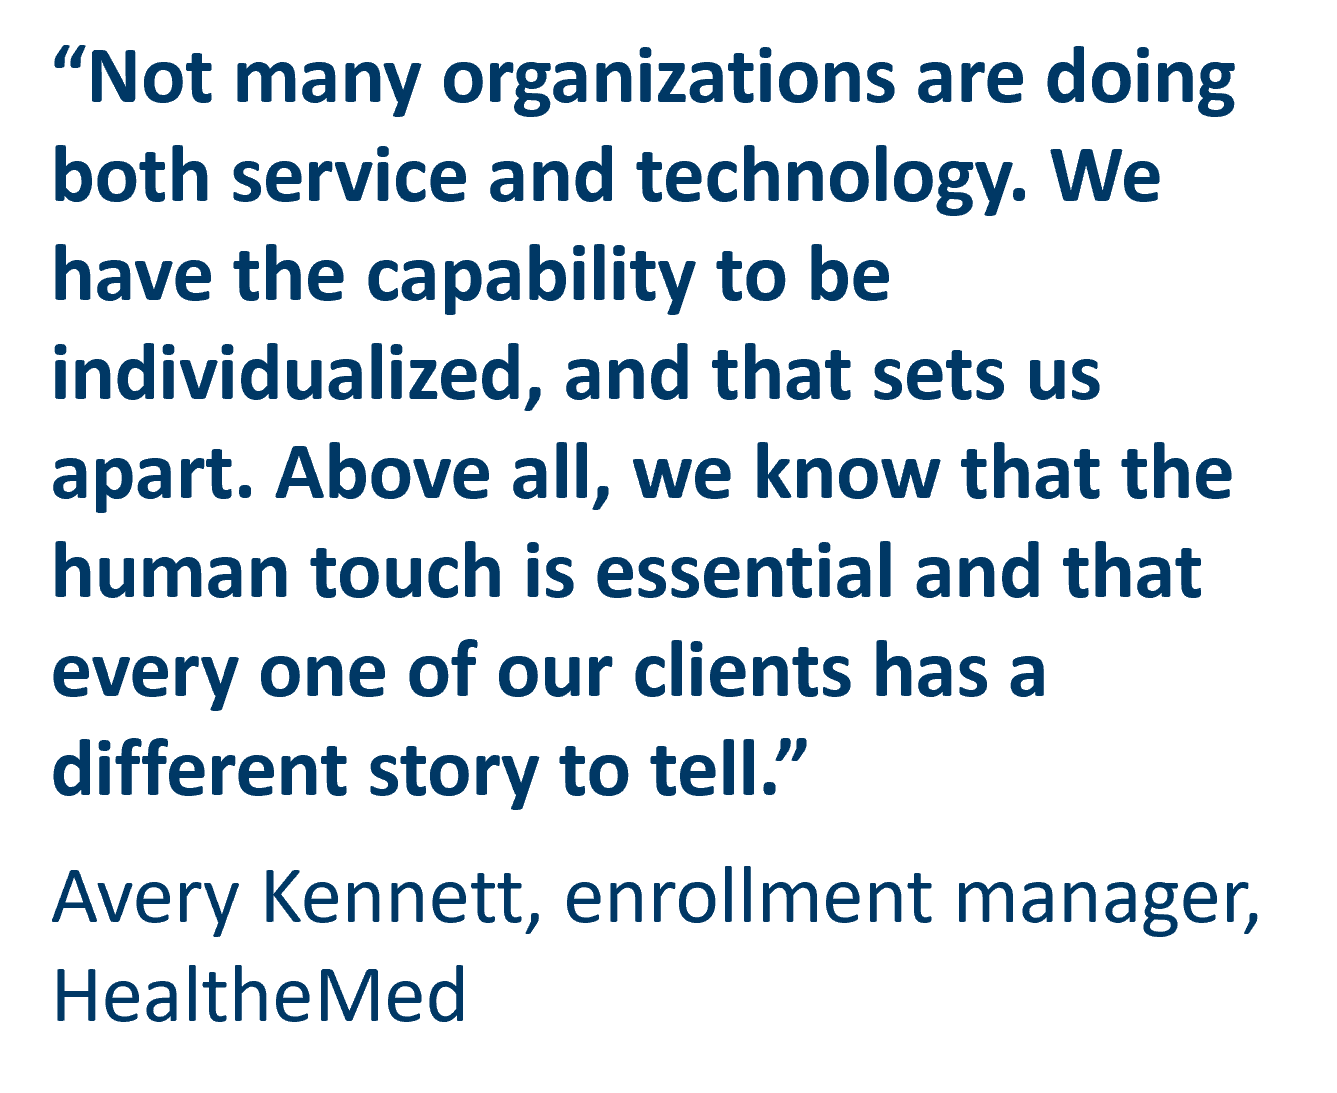 Not many organizations are doing both service and technology. We have the capability to be individualized, and that sets us apart. Above all, we know that the human touch is essential and that every one of our clients has a different story to tell.